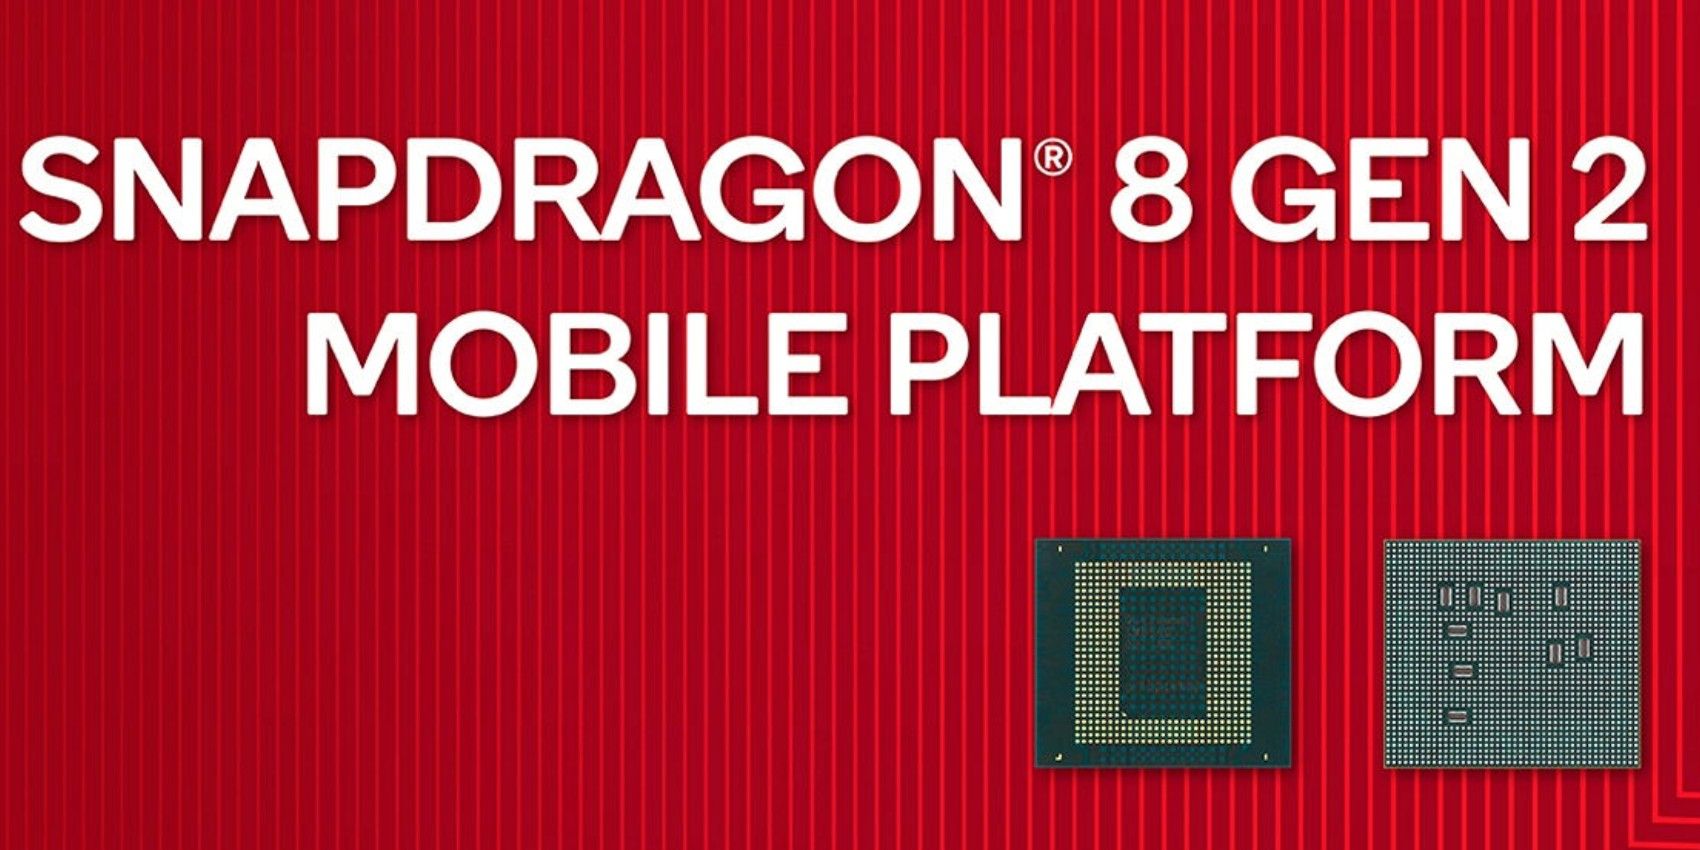 Snapdragon 8 Gen 2 pictured against a striped red background, with the words "Snapdragon 8 Gen 2 Mobile Platform" displayed in white